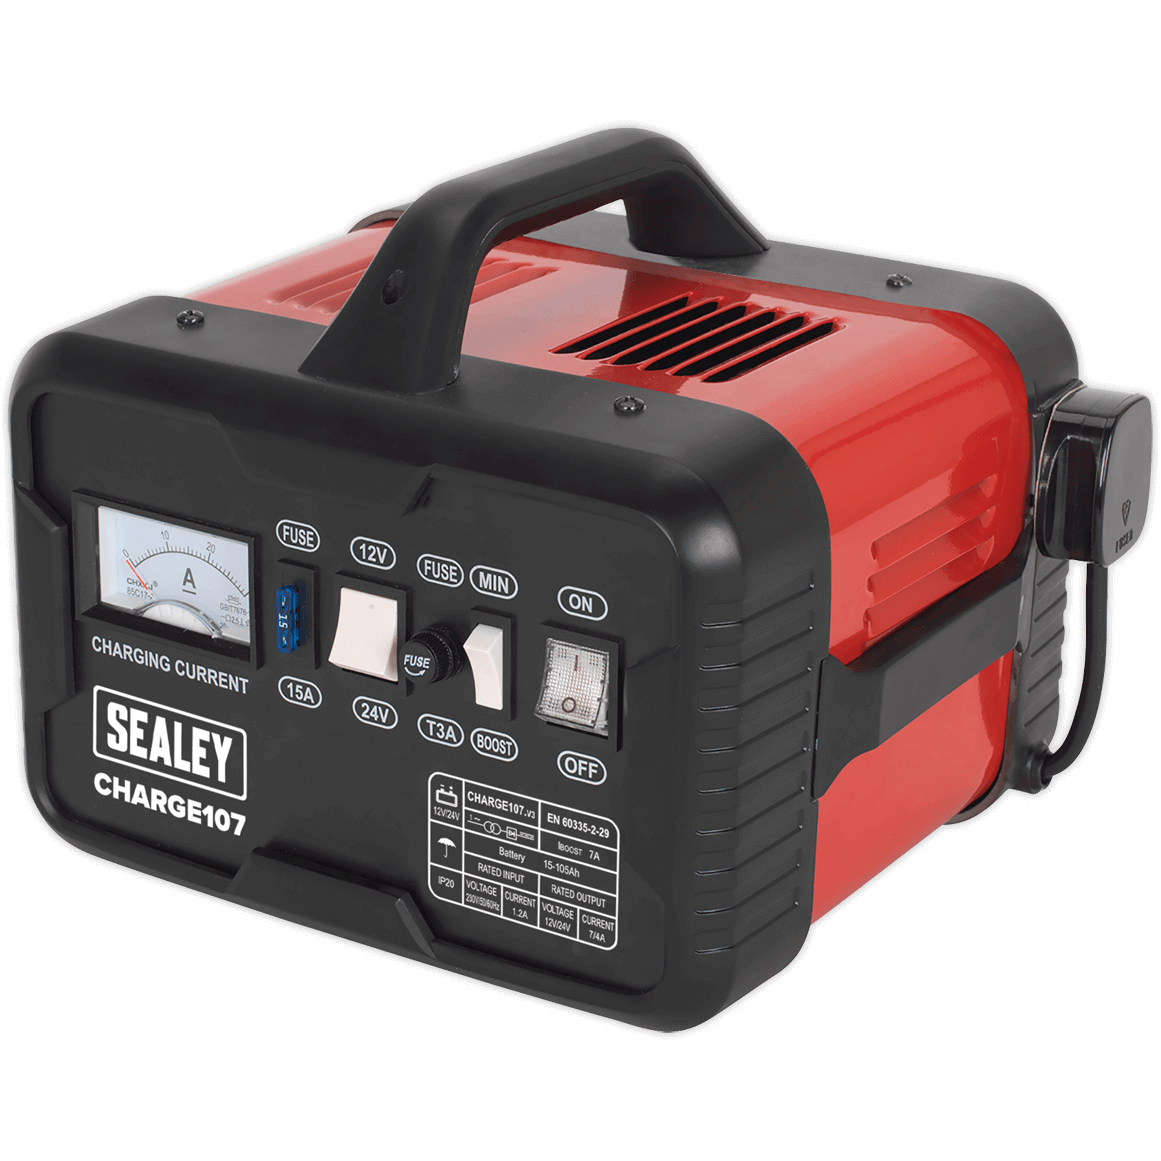 Sealey CHARGE107 Automotive Battery Charger 12v or 24v